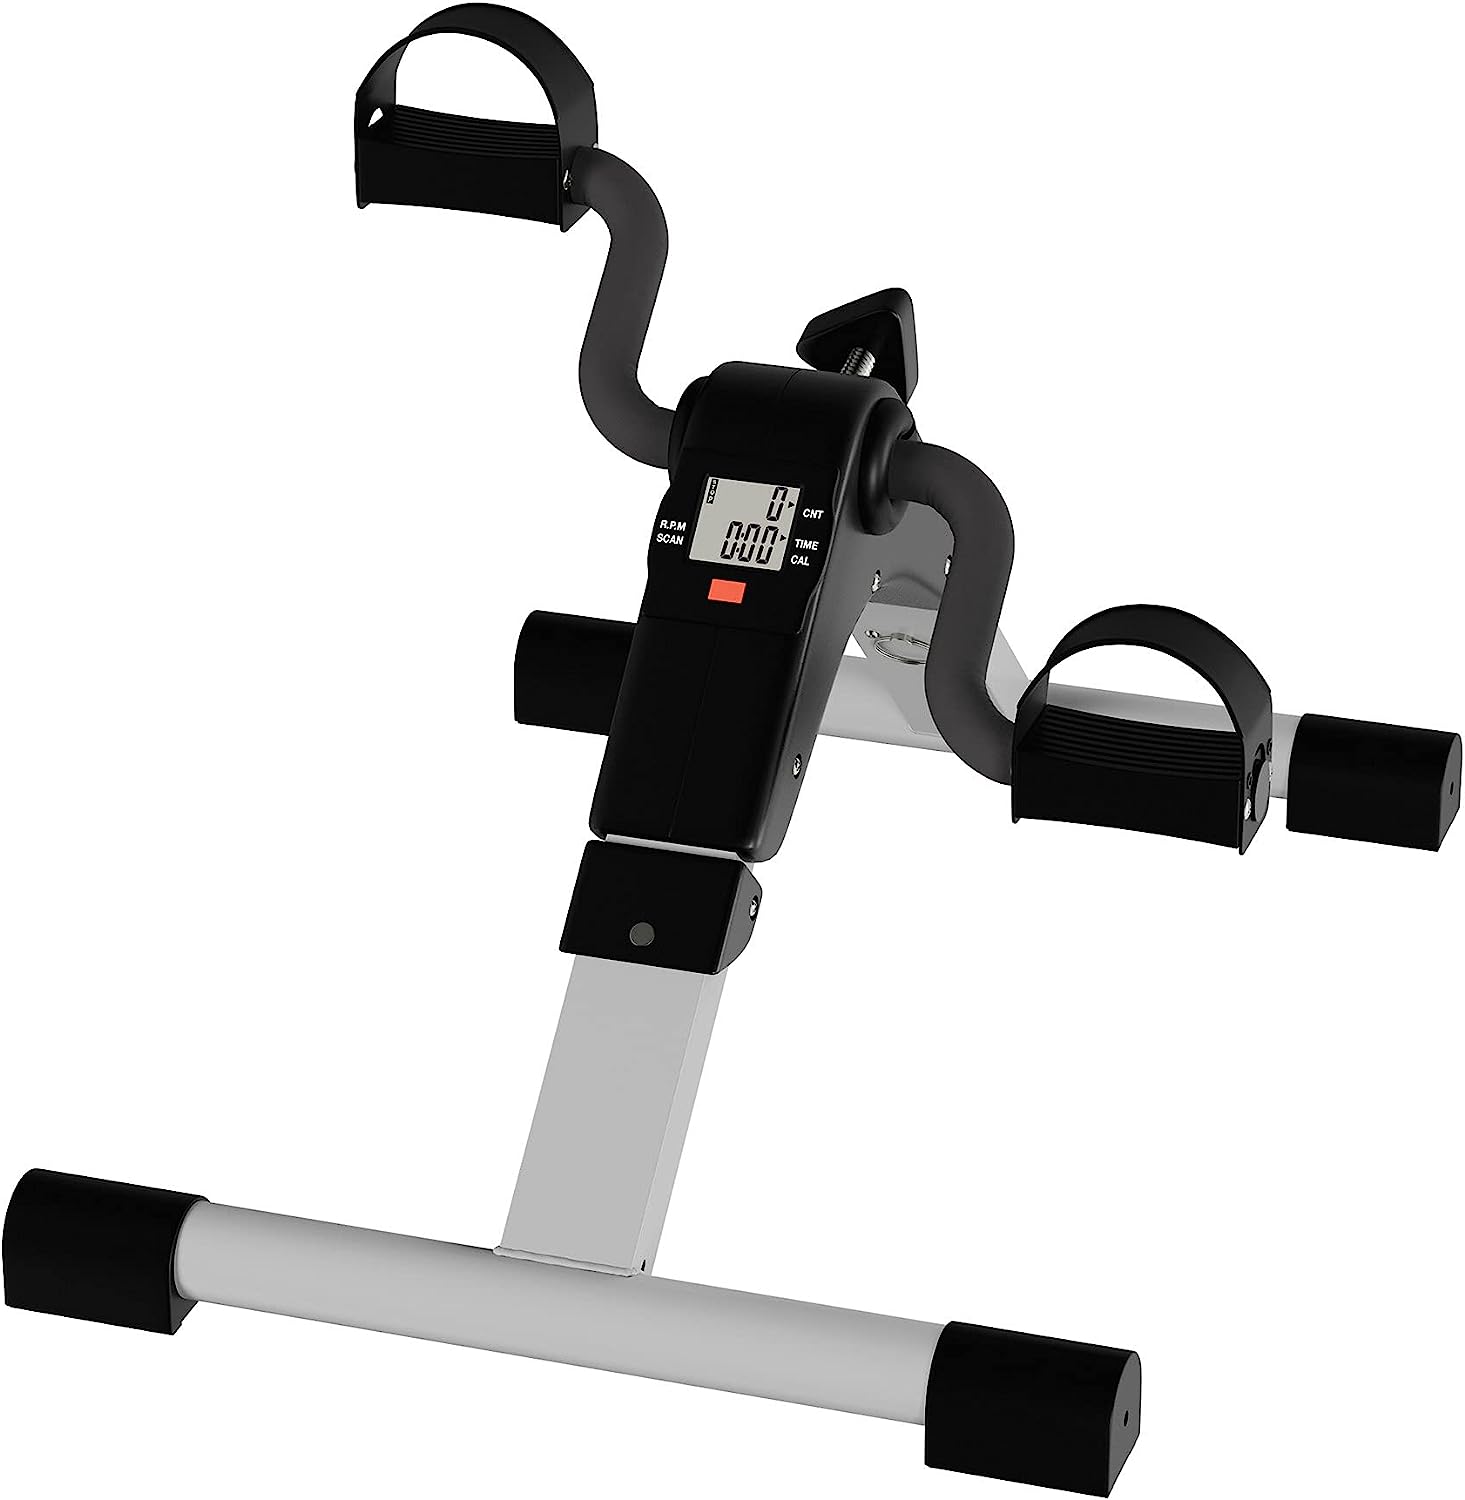 Portable Under Desk Stationary Fitness Machine Review